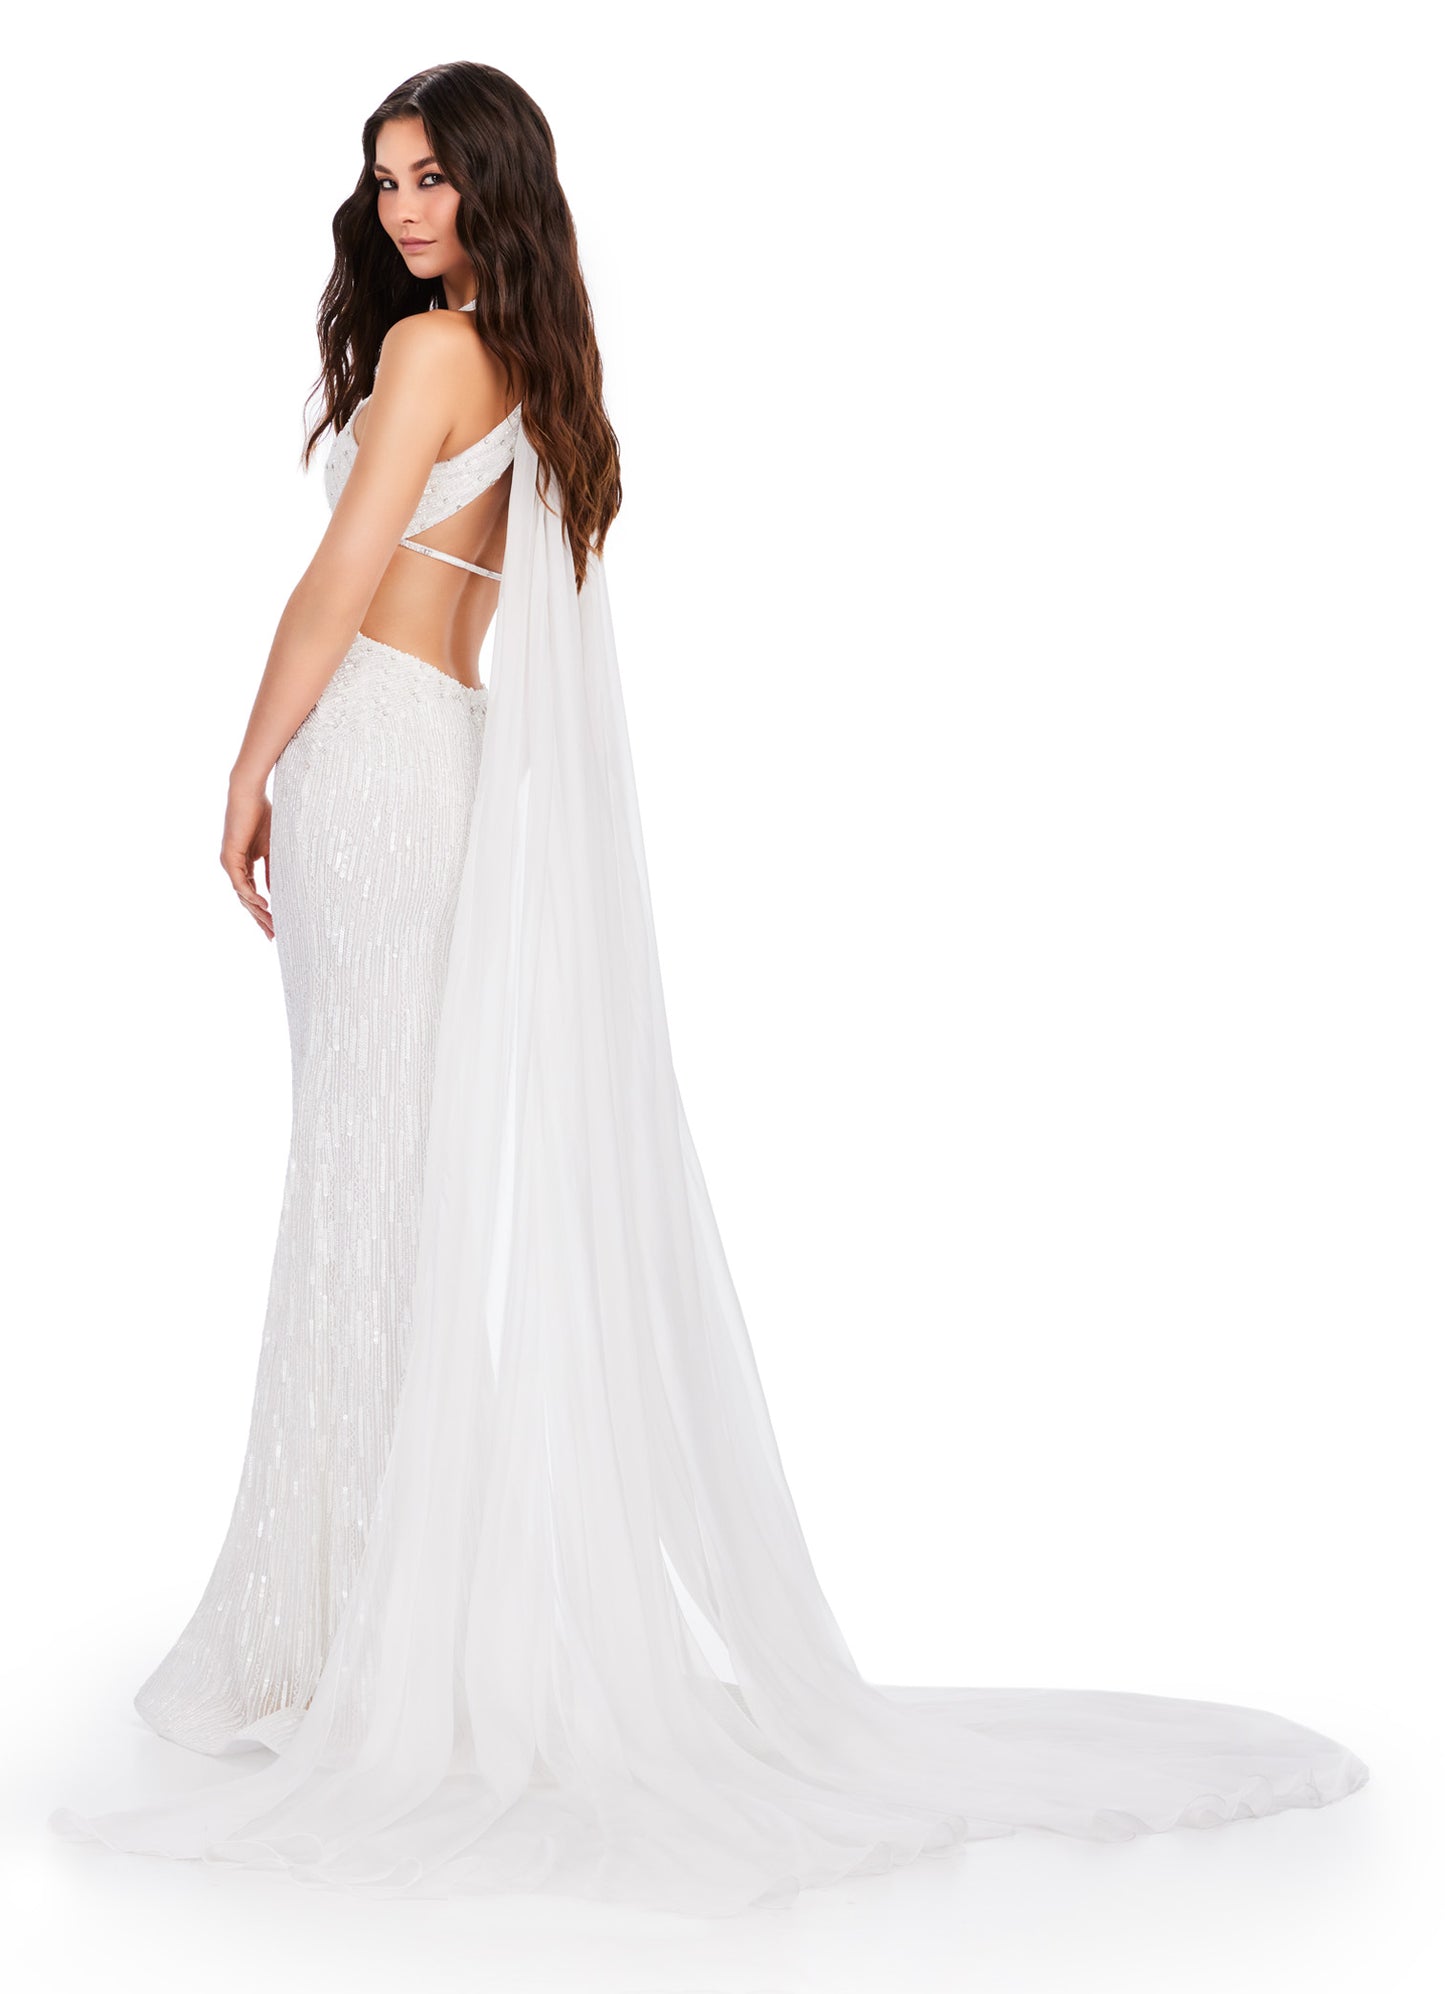 This Ashley Lauren 11499 long prom dress features beautiful beadwork and cut outs, as well as a stunning cape and halter design. Perfect for formal events and pageants, this gown will make you stand out with its elegant and glamorous style. Ready to hit the runway? This fully beaded halter neck gown features cut outs and chiffon capes to ensure you'll make an entrance.